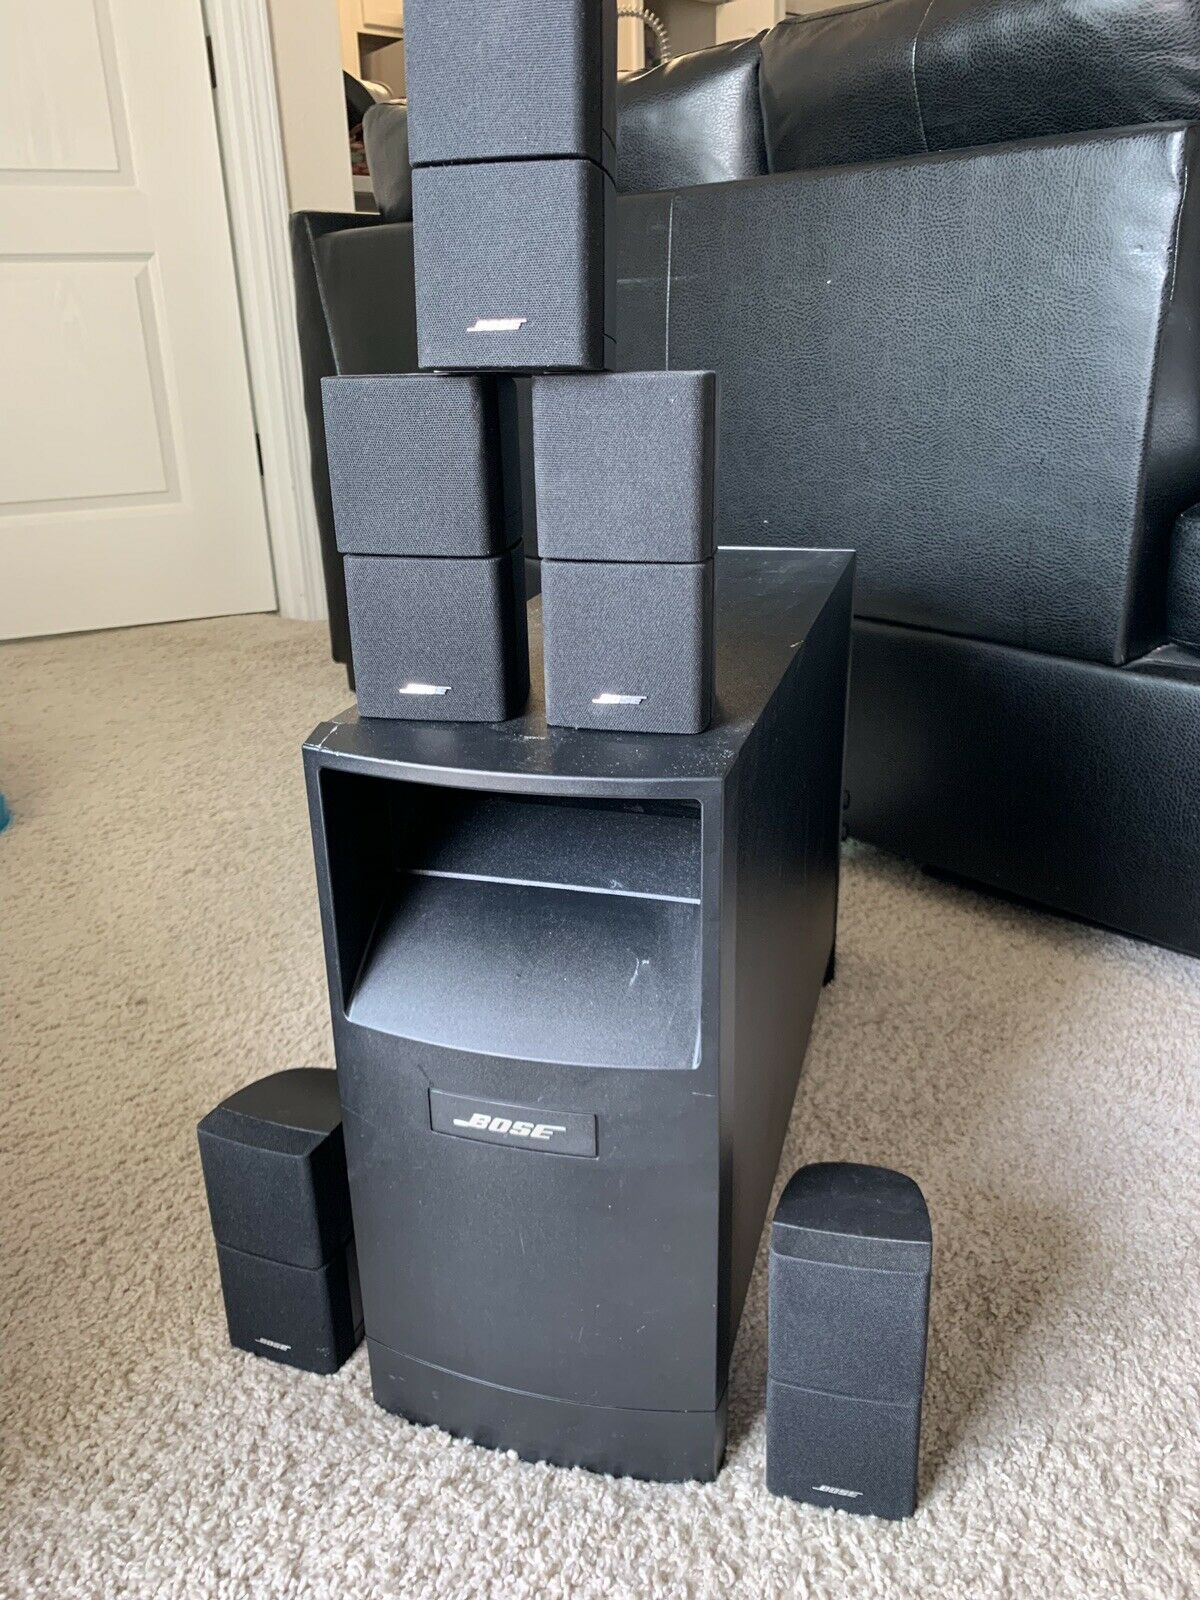 Bose Acoustimass 10 Series III 5.1 Home Theater Speaker System